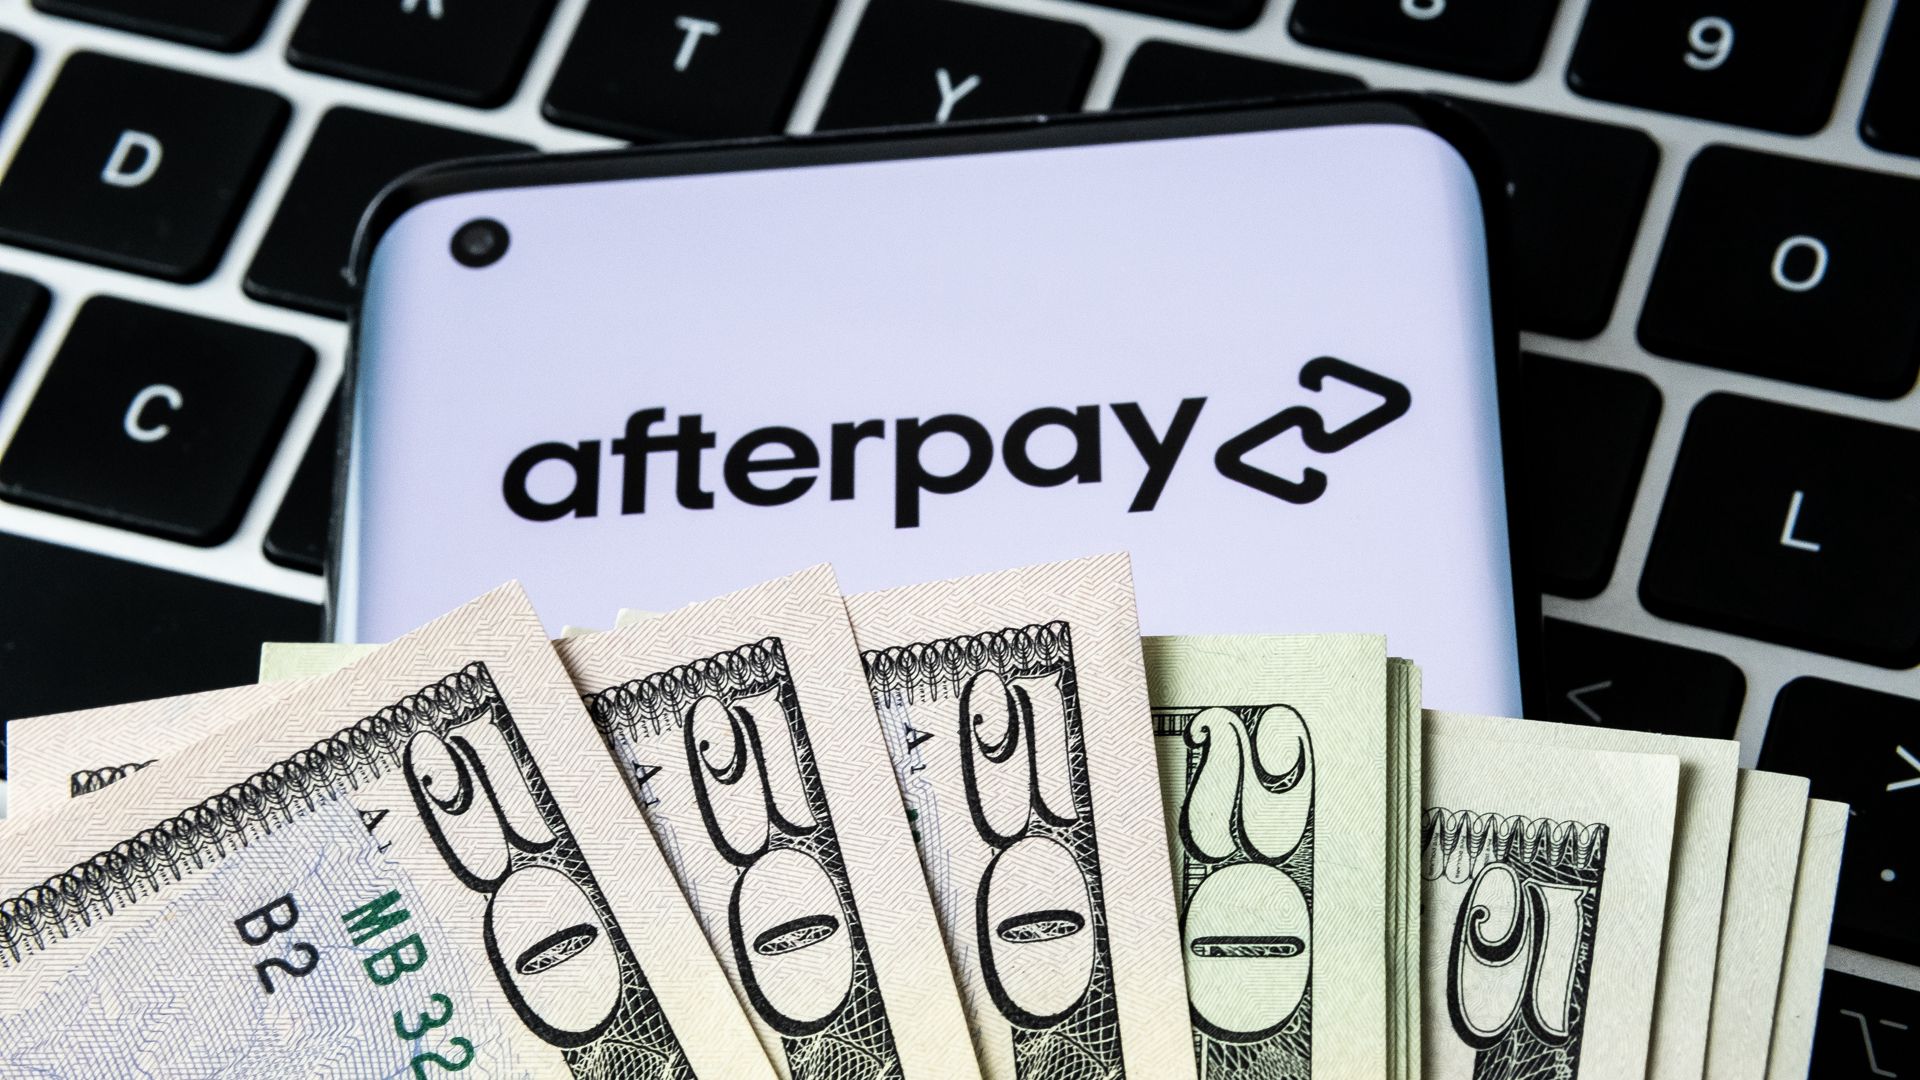 Afterpay app on a phone covered in money.